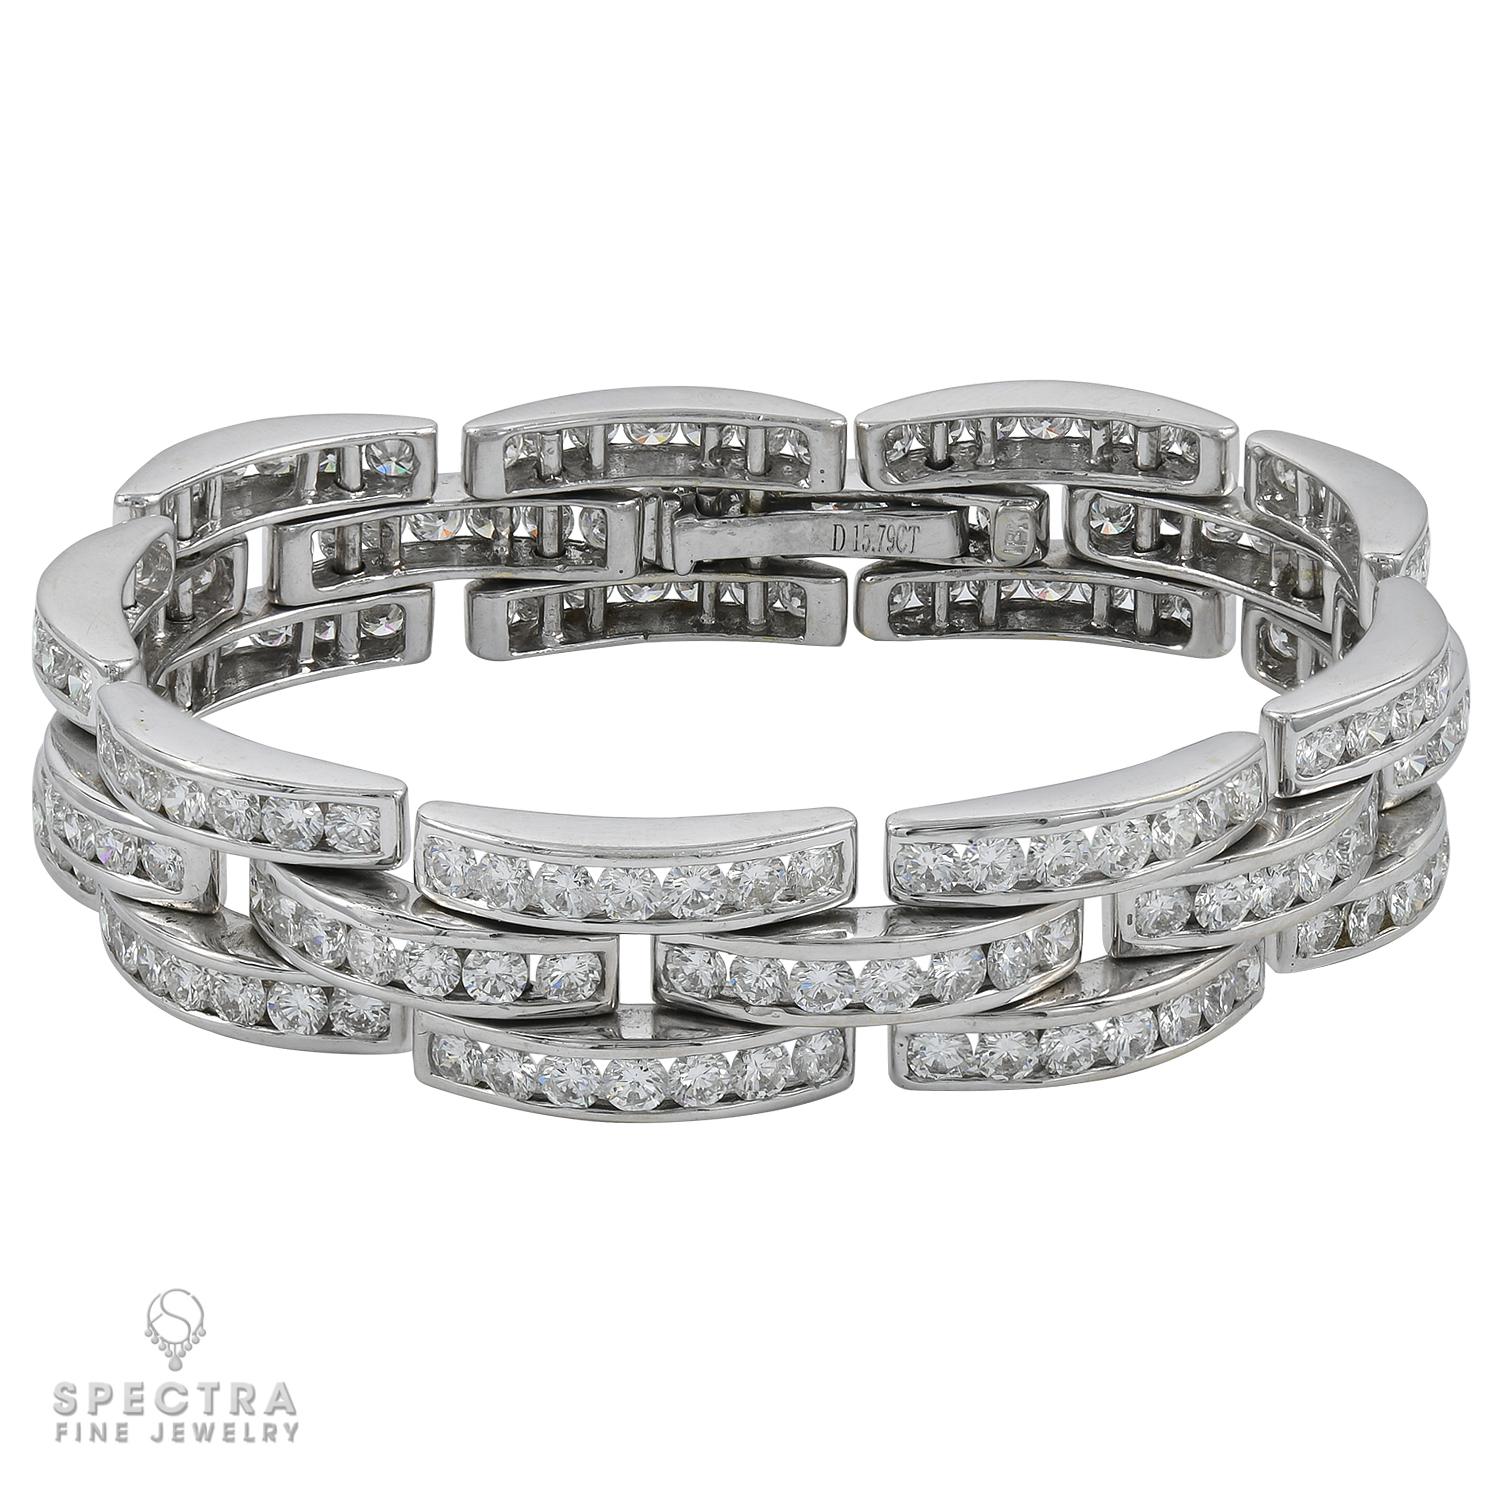 Enthusiasts of Art Deco jewelry will be captivated by the exquisite geometry showcased in this Contemporary Diamond Pave Bracelet. Despite its creation in the 21st century, the lavish bracelet exudes the charm of a bygone era, channeling the sleek